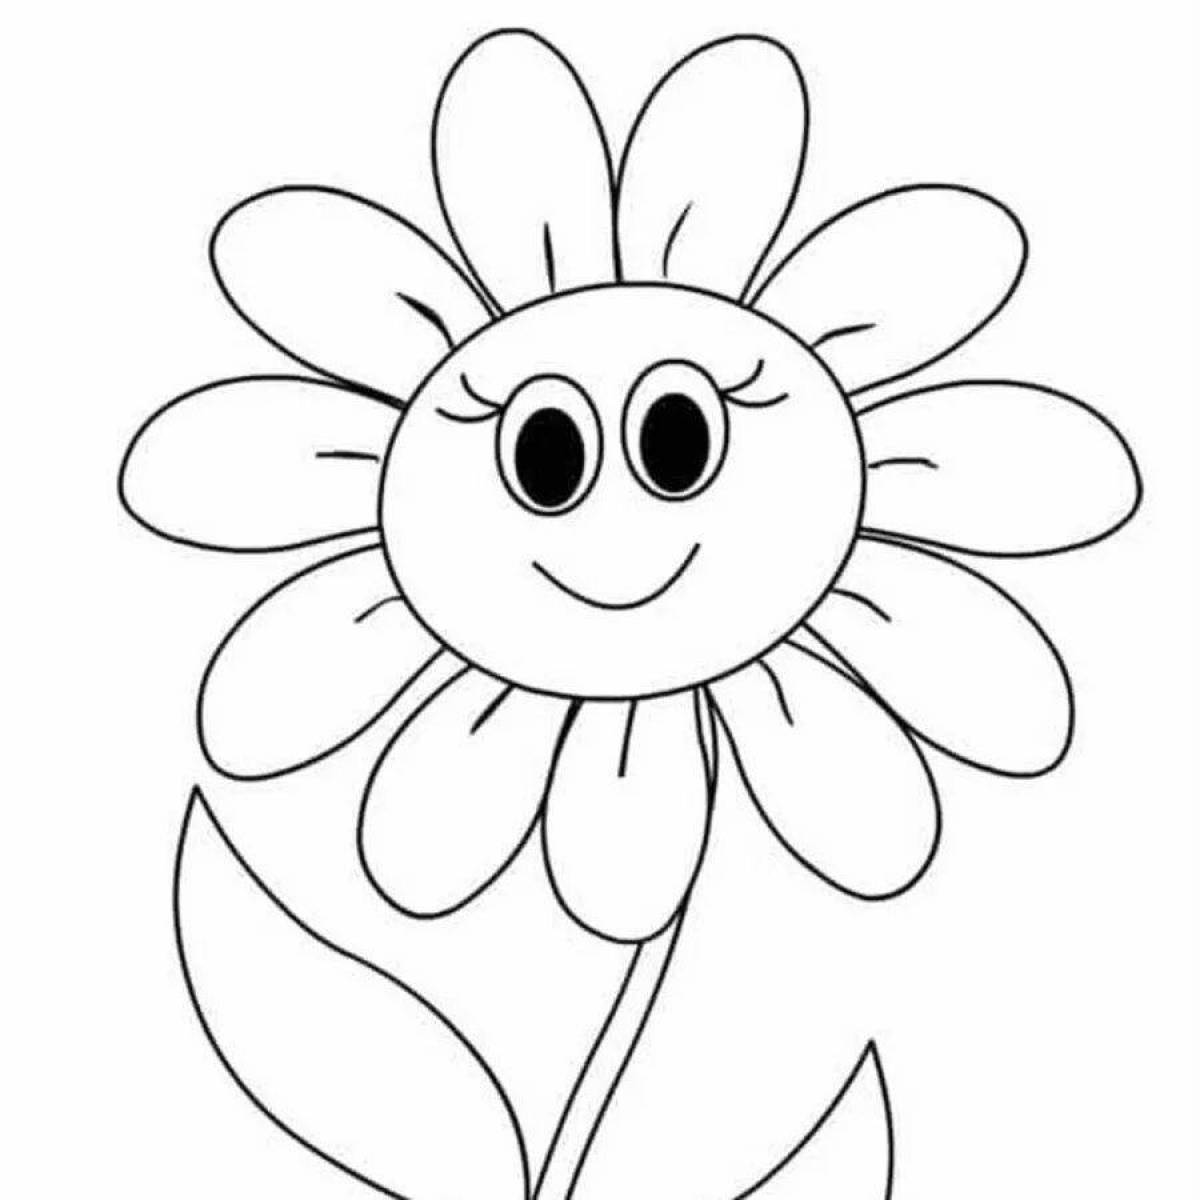 Sweet flower coloring book for 4-5 year olds